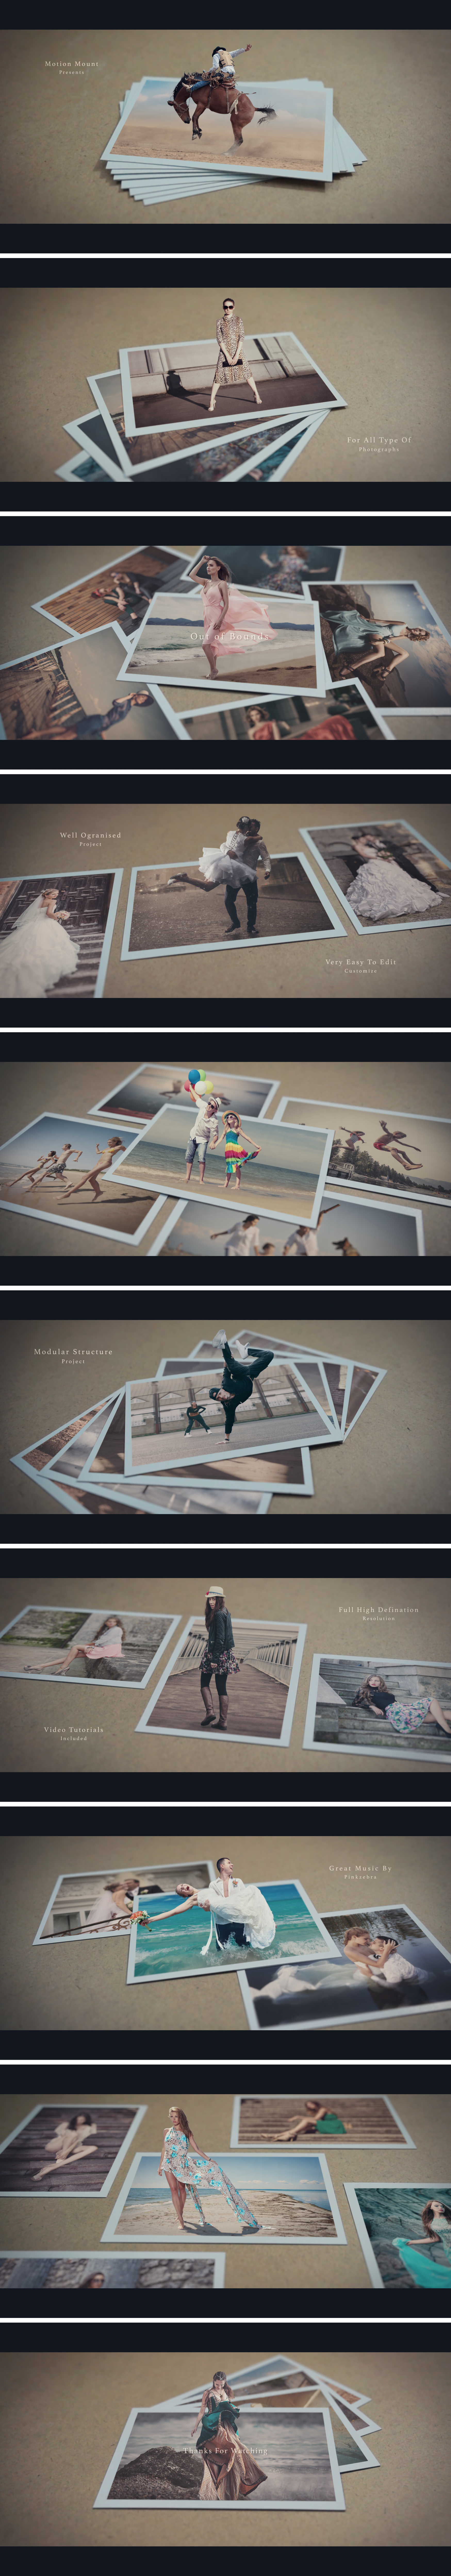 Videohive - Out of Bounds Opener - Slideshow 19856768 - Free Download 